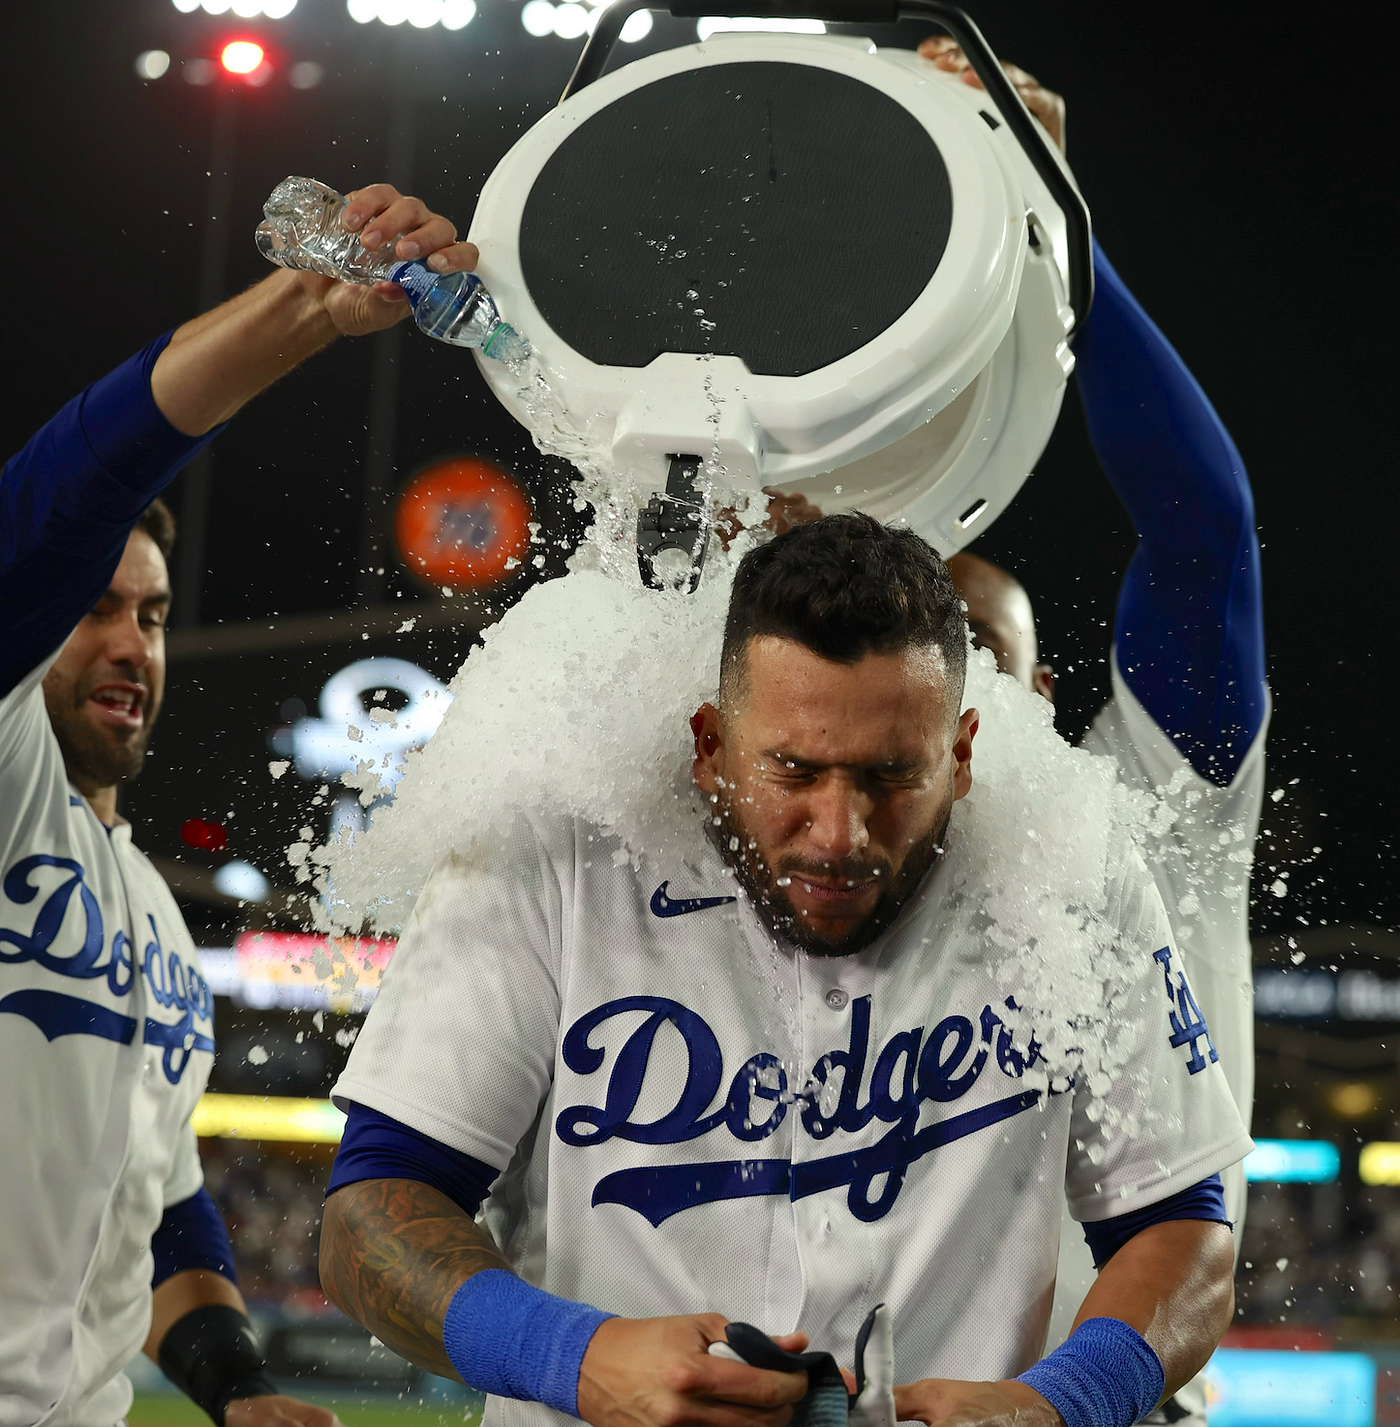 David Peralta has his 'Welcome to the Dodgers' moment, by Cary Osborne